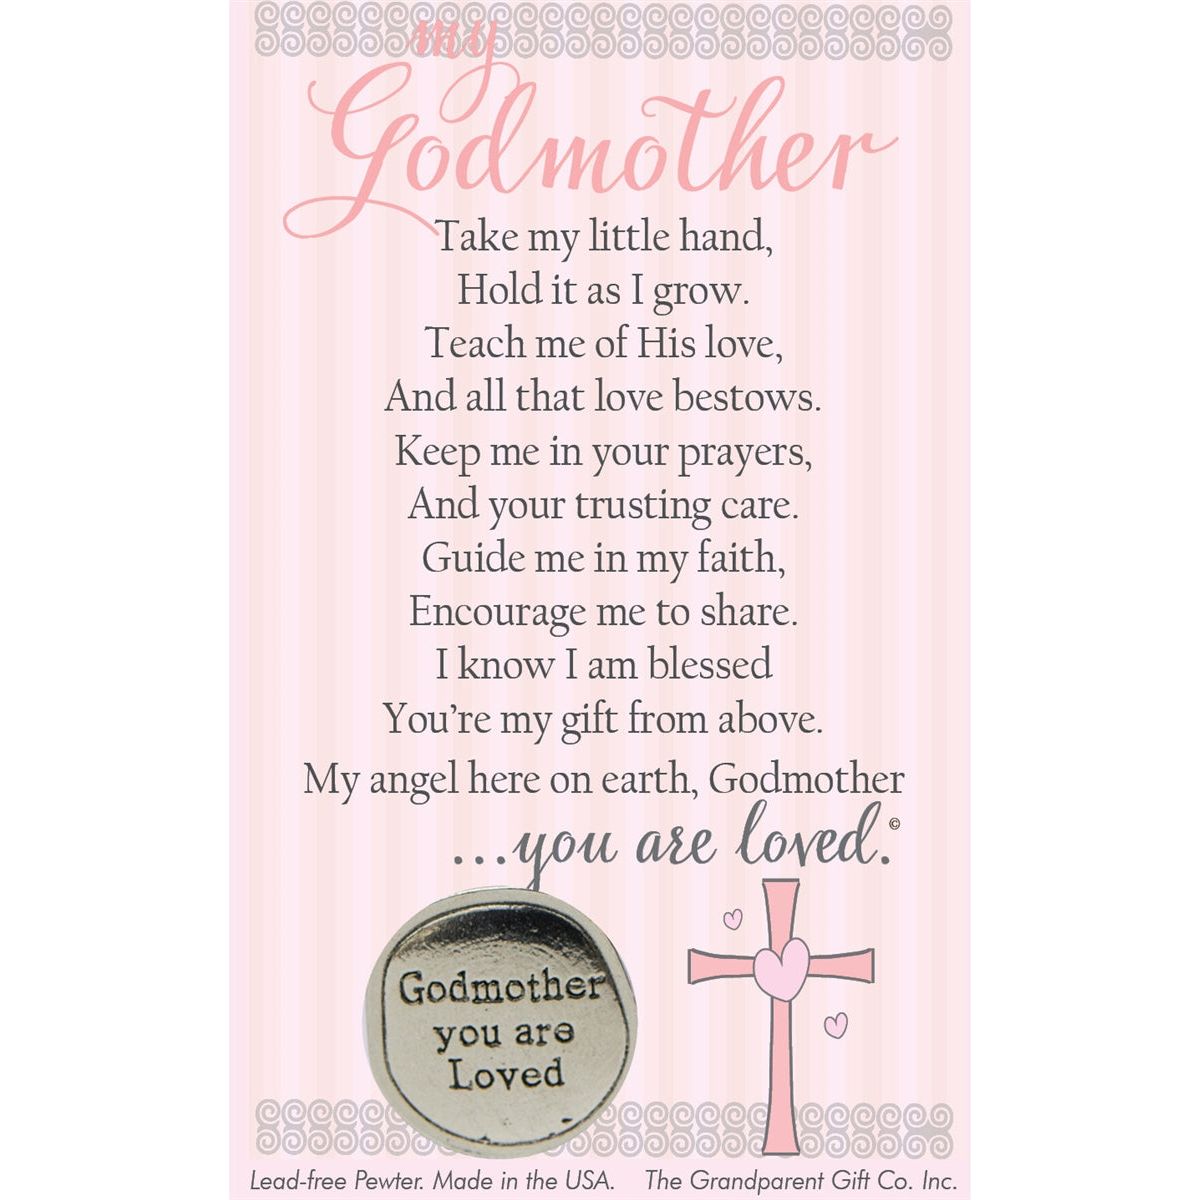 My Godmother poem and coin.